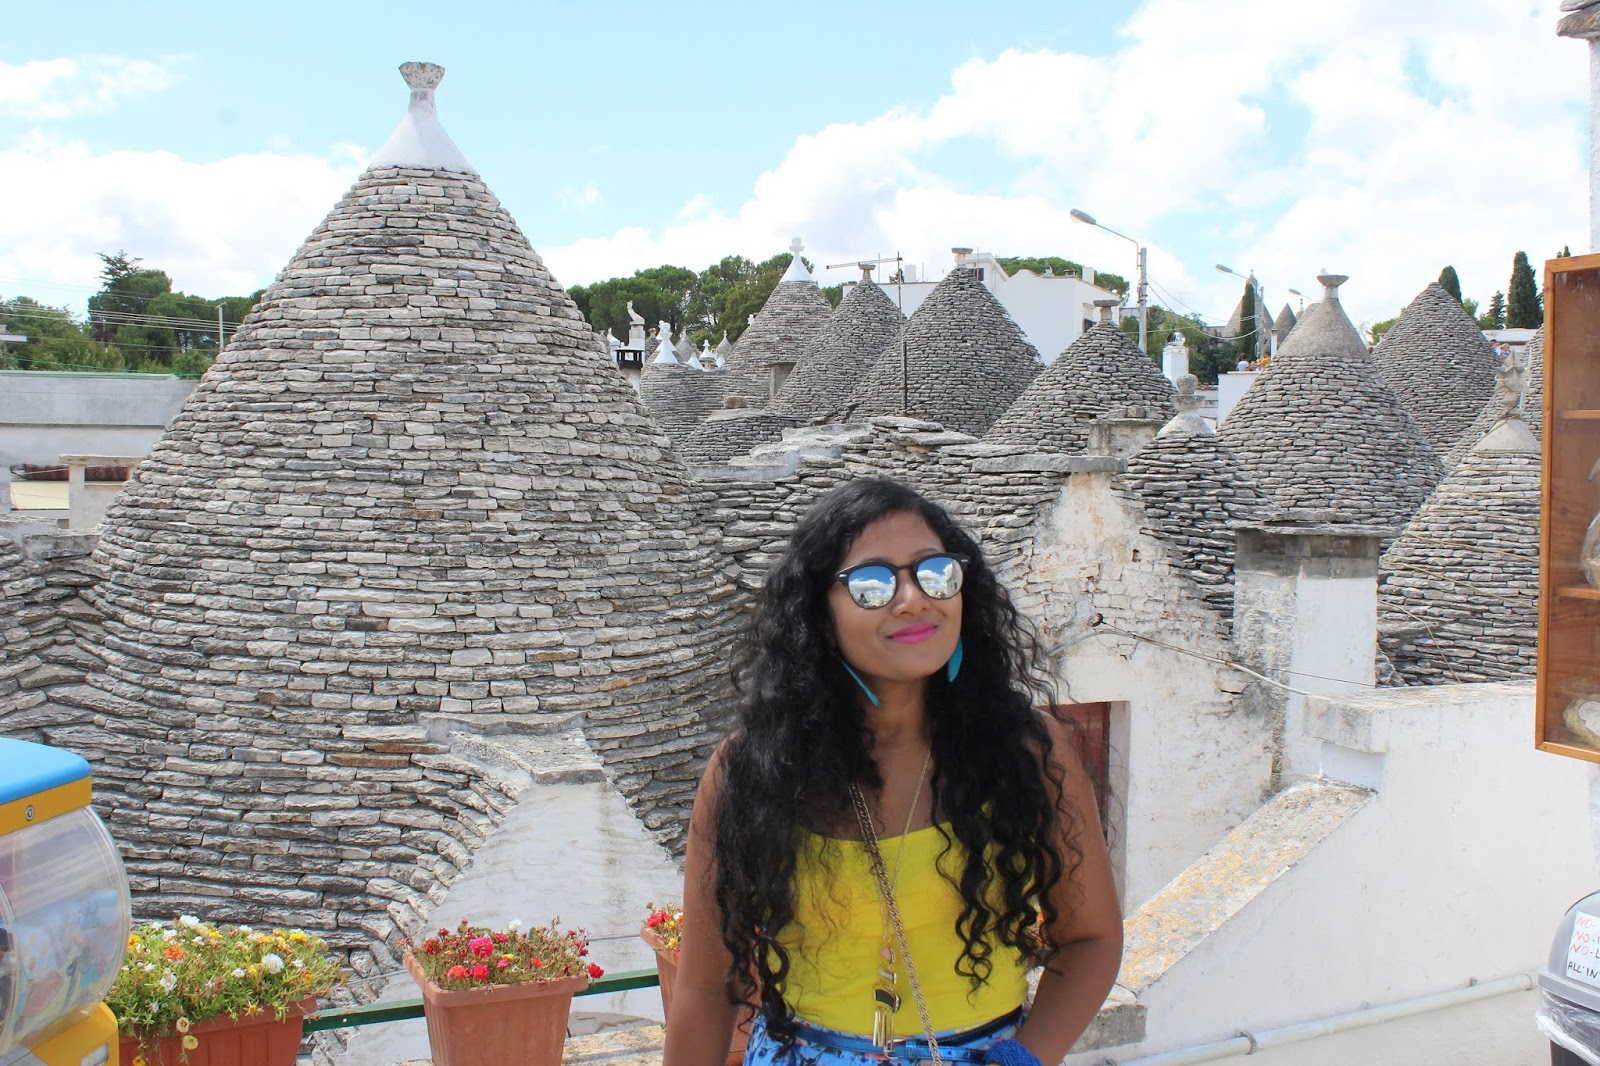 trulli houses for rent, trulli houses for sale, trulli italy images, trulli puglia images, how are trulli houses built, puglia, trulli with pool, trulli inside